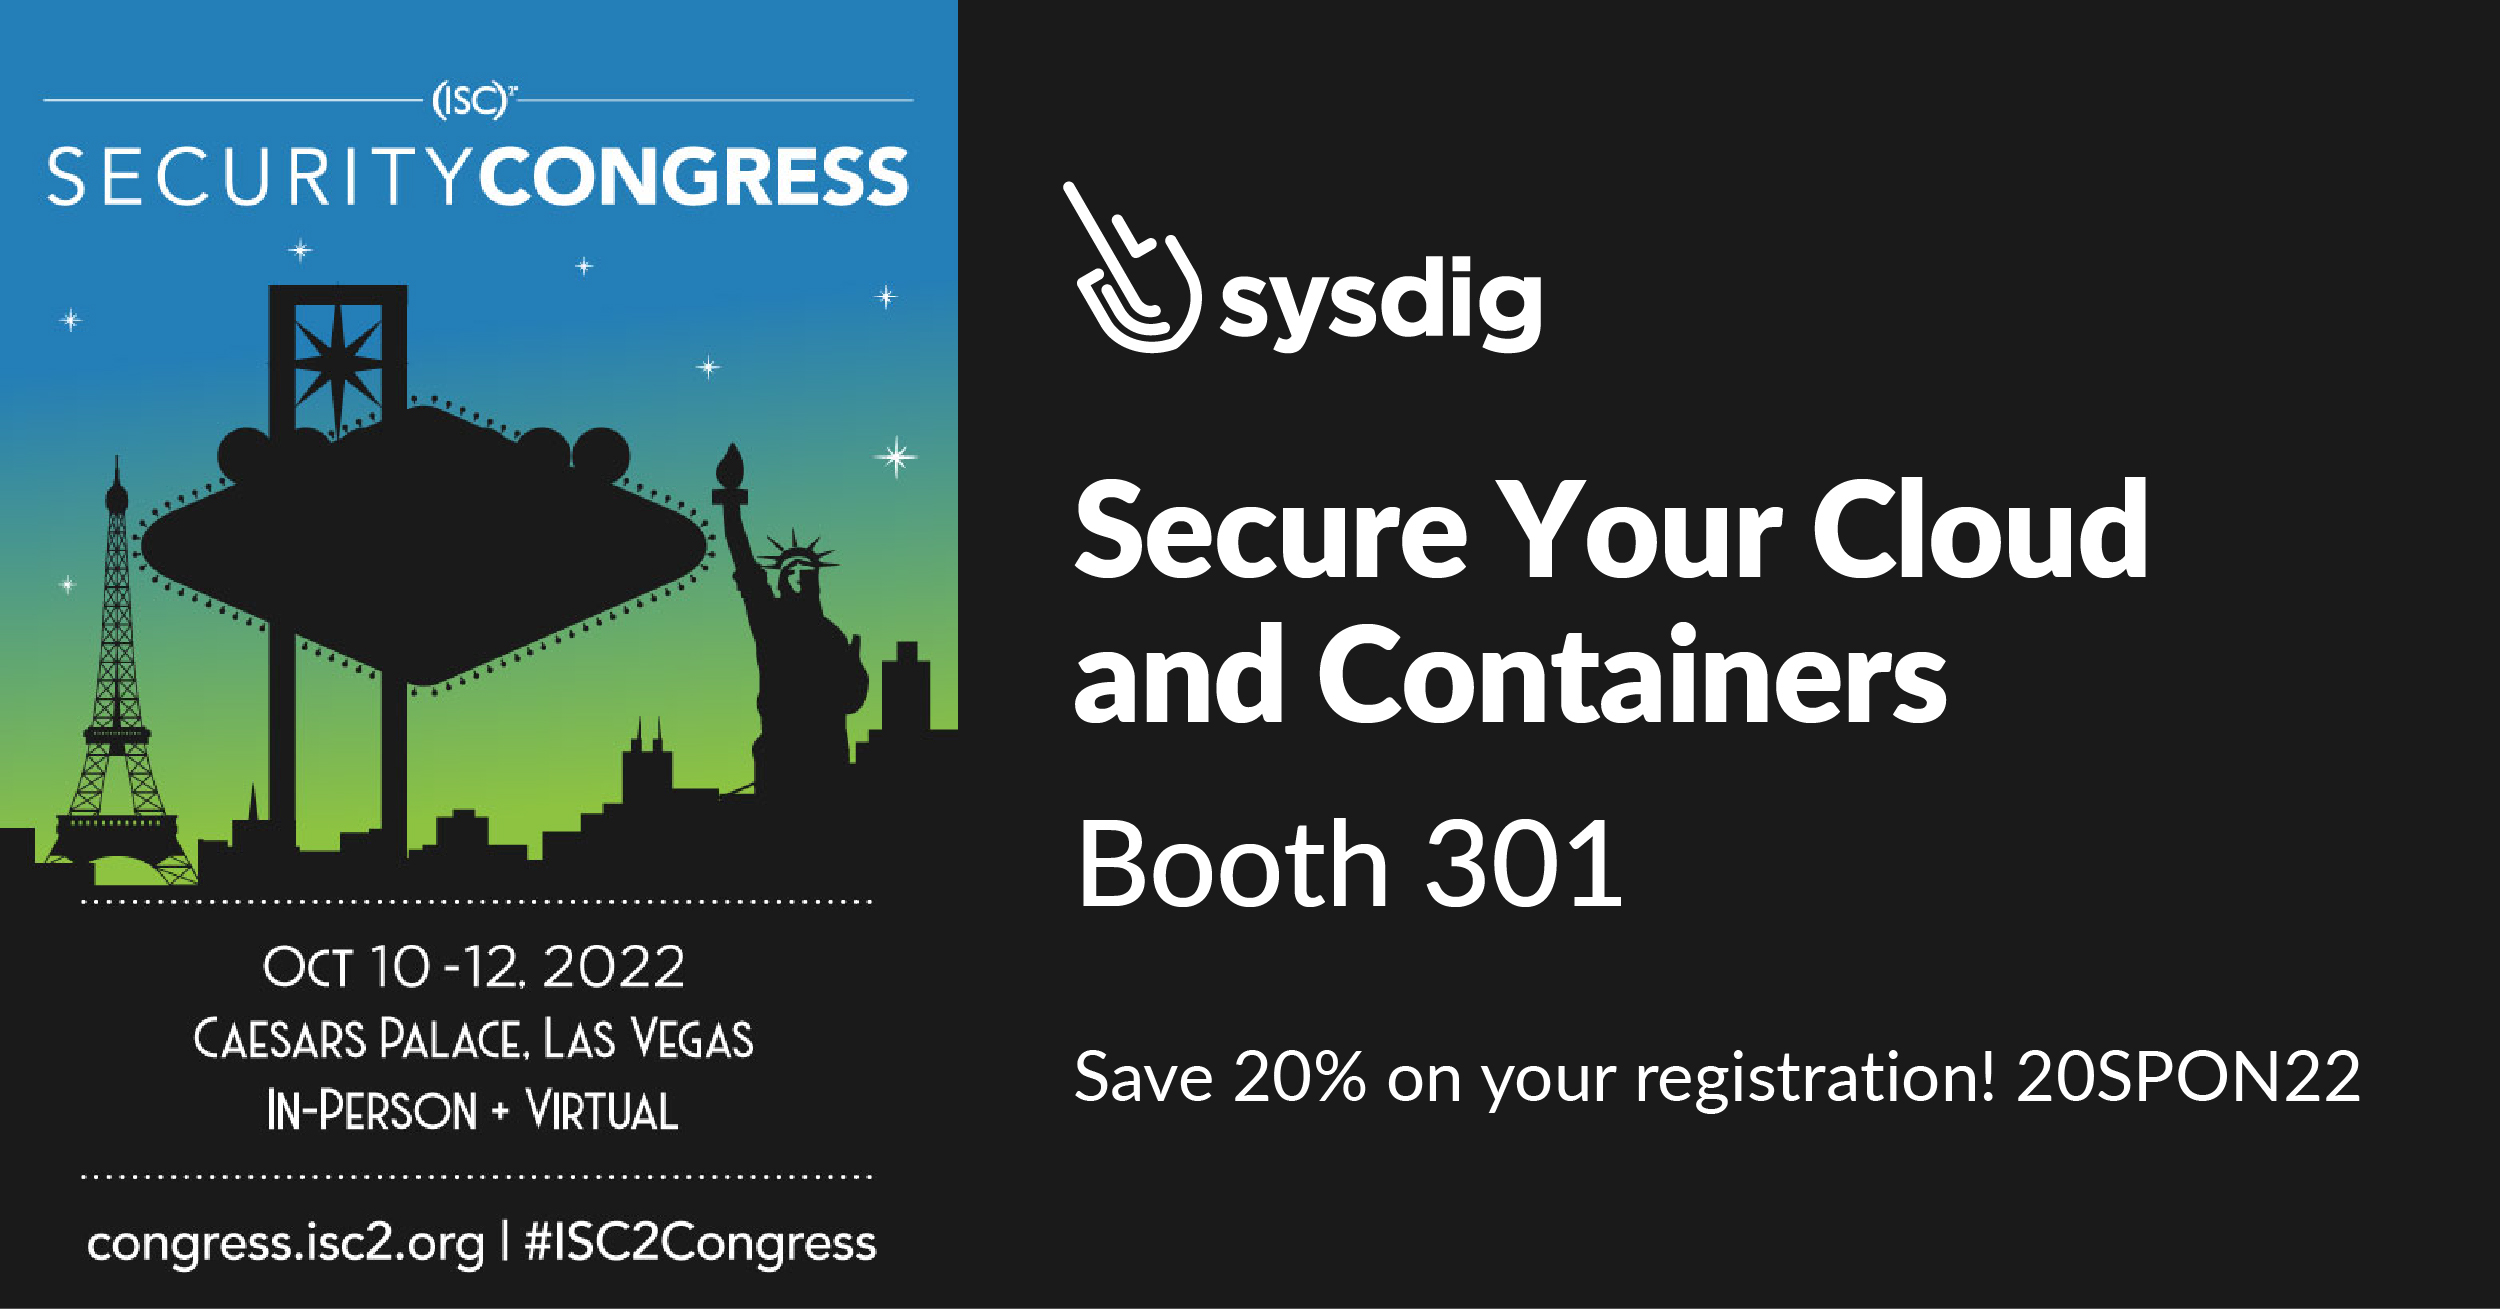 Card advertising a booth at the ISC Security Congress. On the left side: Image of Las Vegas with the inscription: Oct 10 - 12. 2022, Caesars Place, Las Vegas, In-person + Virtual. On the tight side is the text: Secure your cloud and containers, Booth 301. Save 20% on your registration! 20SPON22